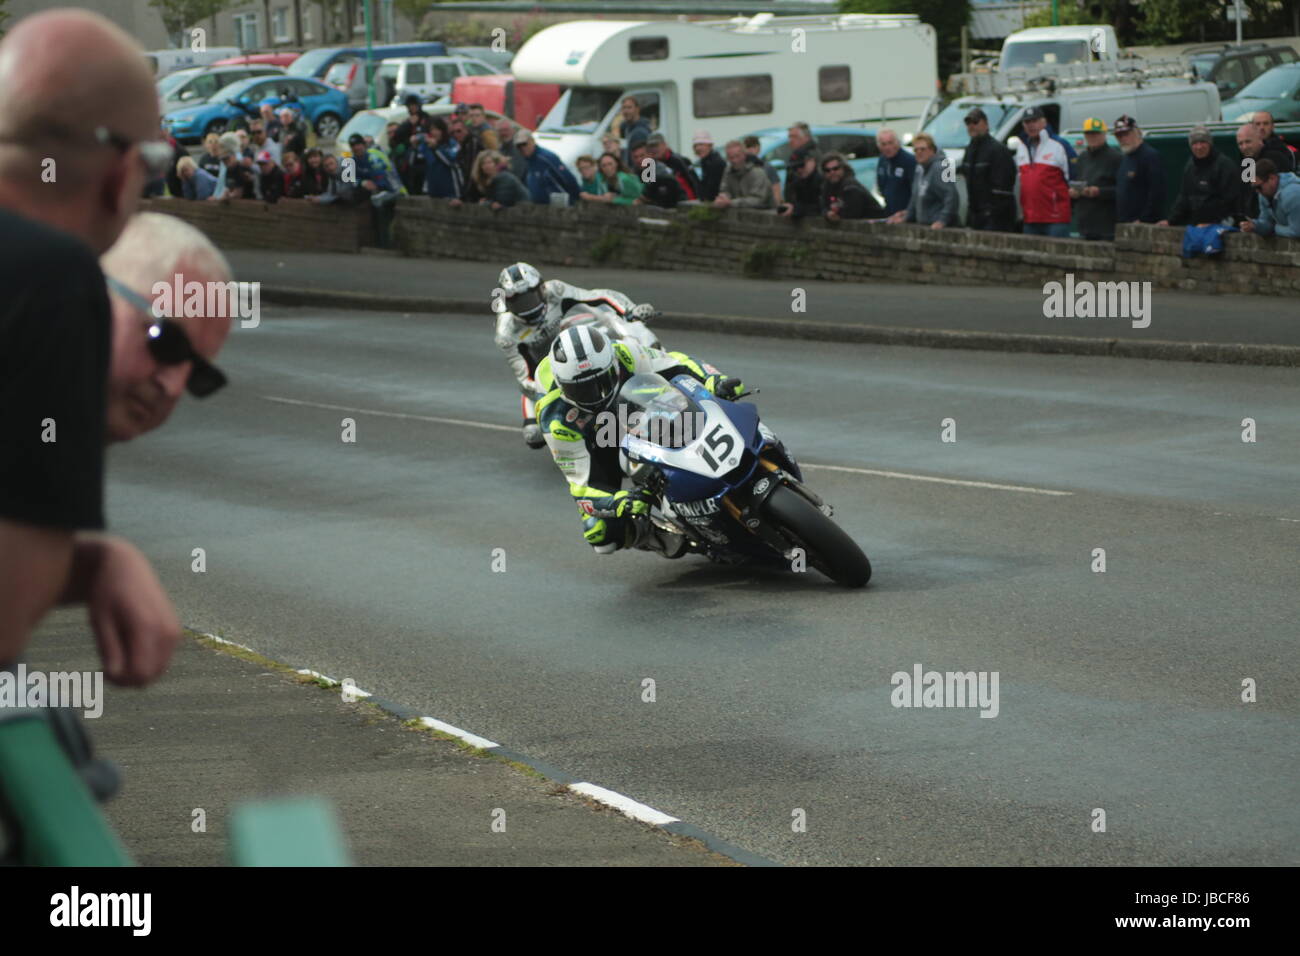 Isle Of Man, British Isles (UK). 9th June, 2017.  Exciting racing as number 15, William Dunlop is chased through Cruickshank's Corner by number 16 Joshua Brookes. Pokerstars Senior TT Race. (Detailed competitor information: https://www.iomtt.com/TT-Database.aspx) Credit: Louisa Jane Bawden/Alamy Live News. Stock Photo